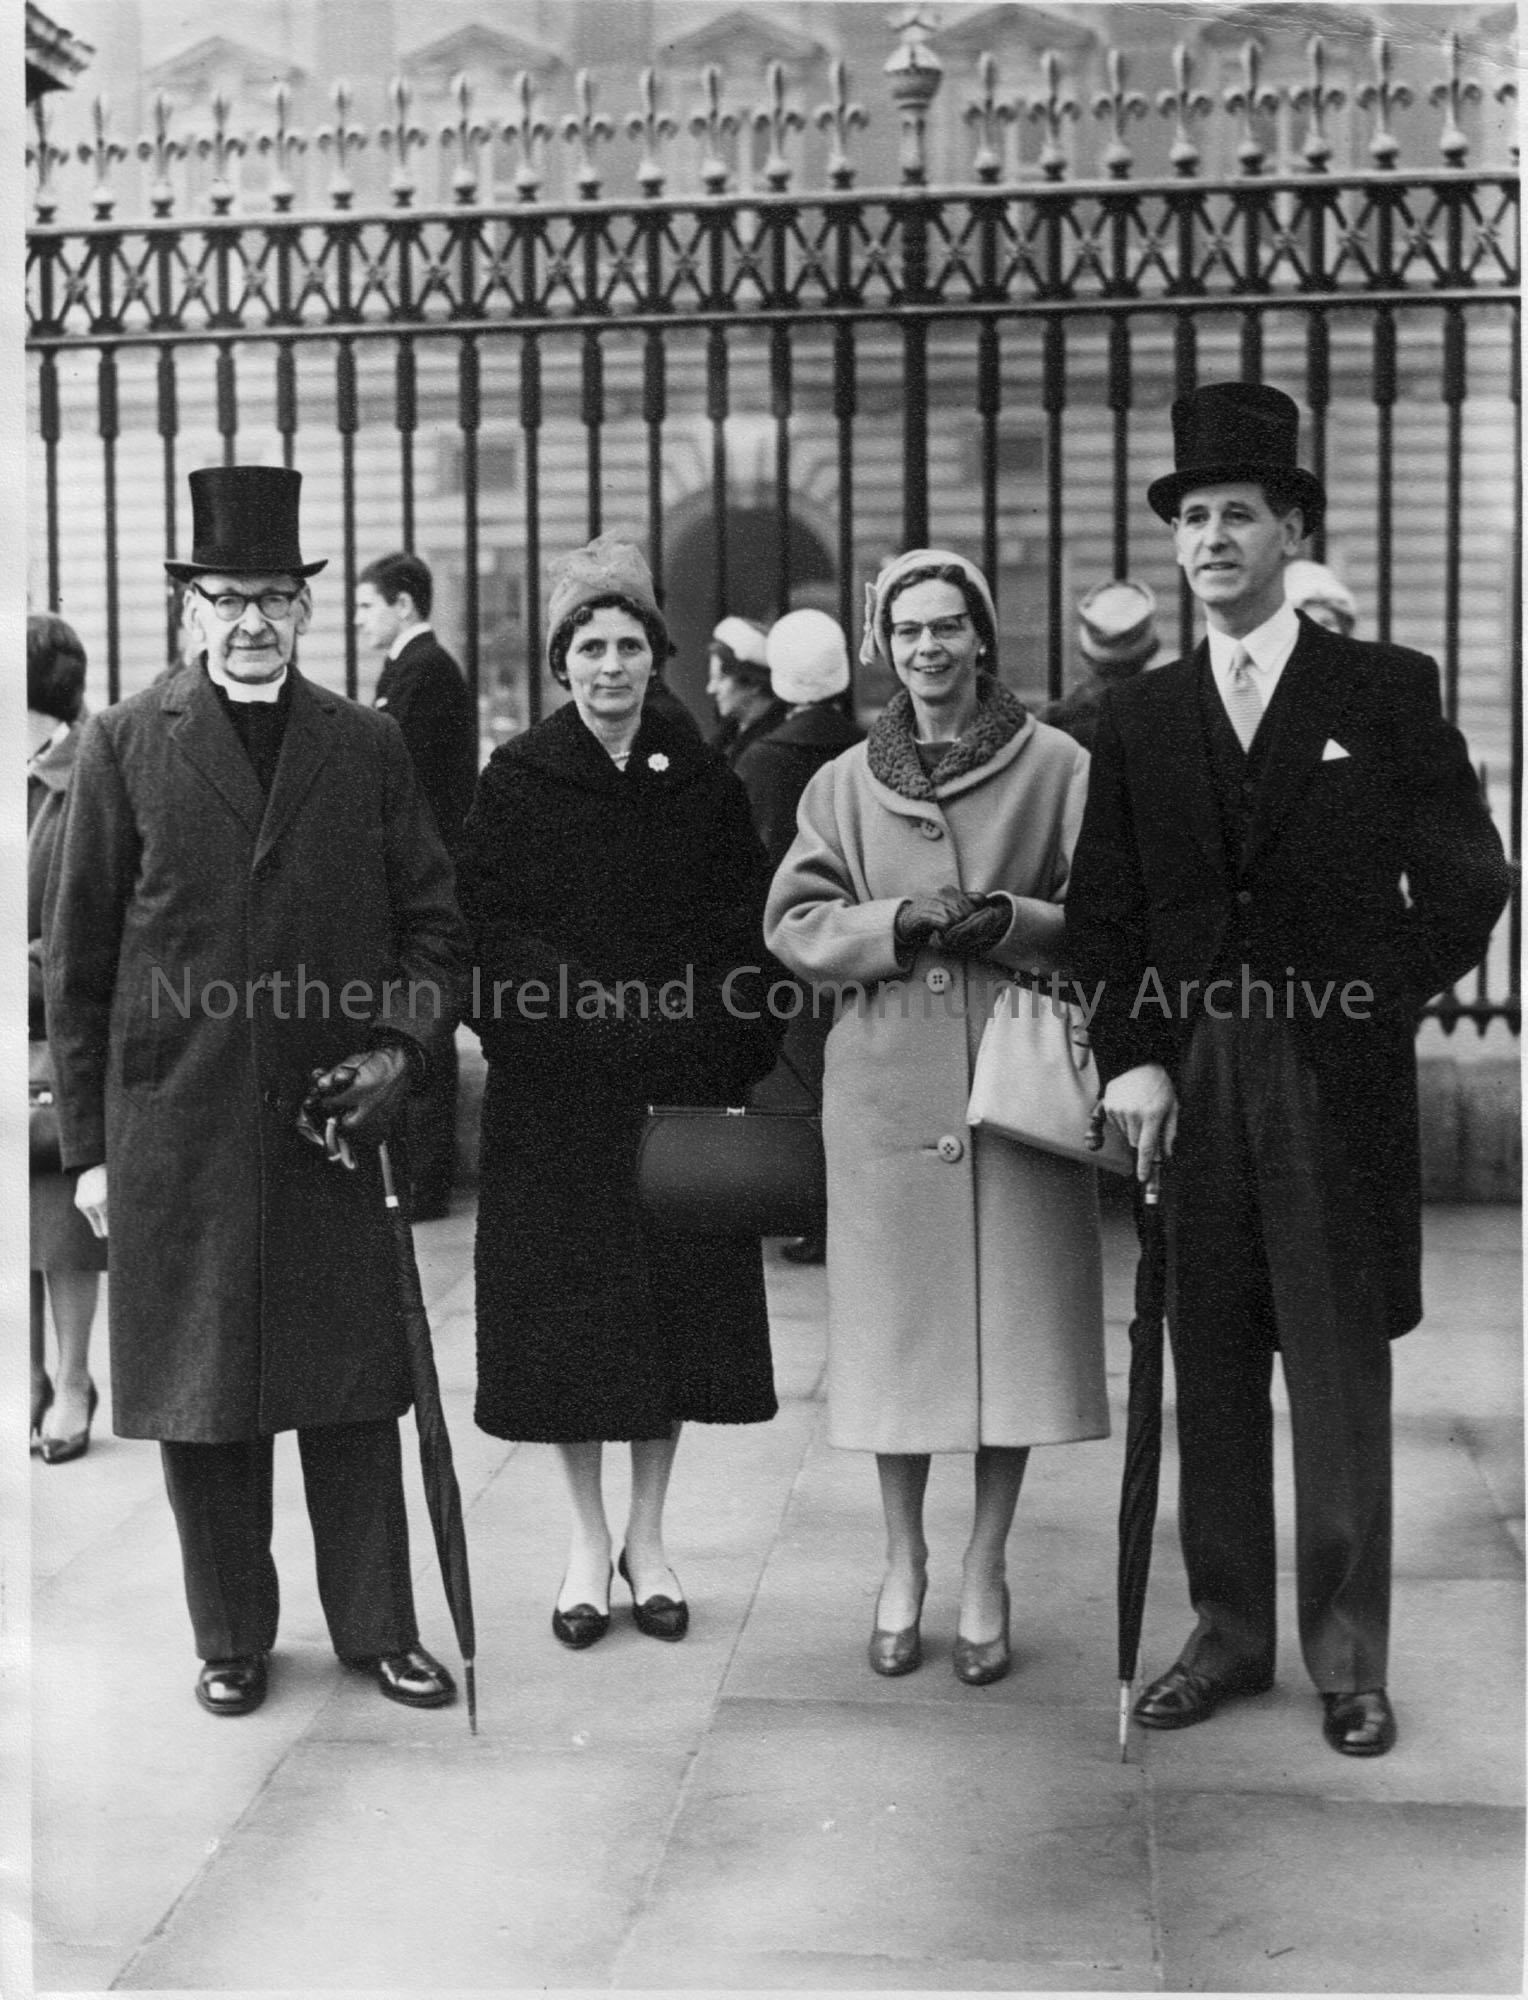 Rev.R.J. McIlmoyle standing outside Buckingham Palace on the occassion of receiving his OBE. A man and two women are also in the photograph